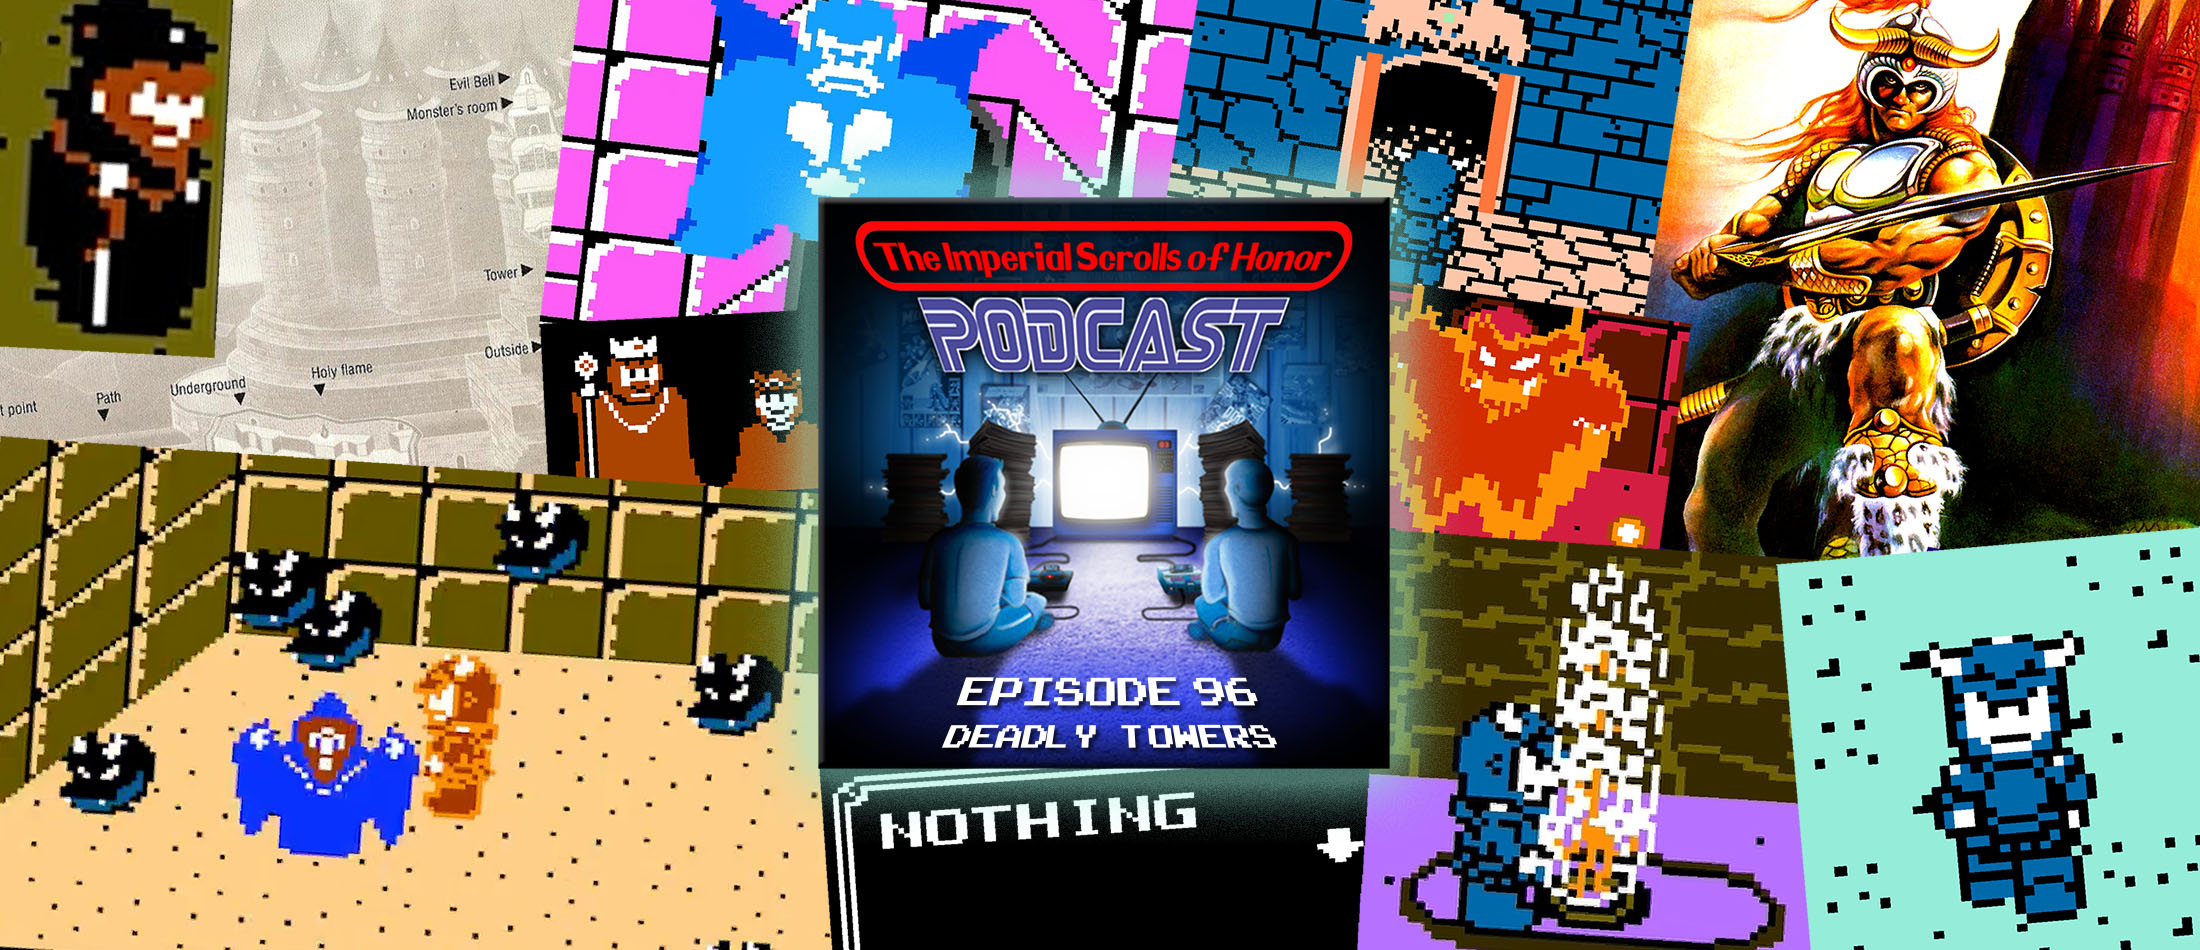 The Imperial Scrolls of Honor Podcast - Ep 96 - Deadly Towers (NES)